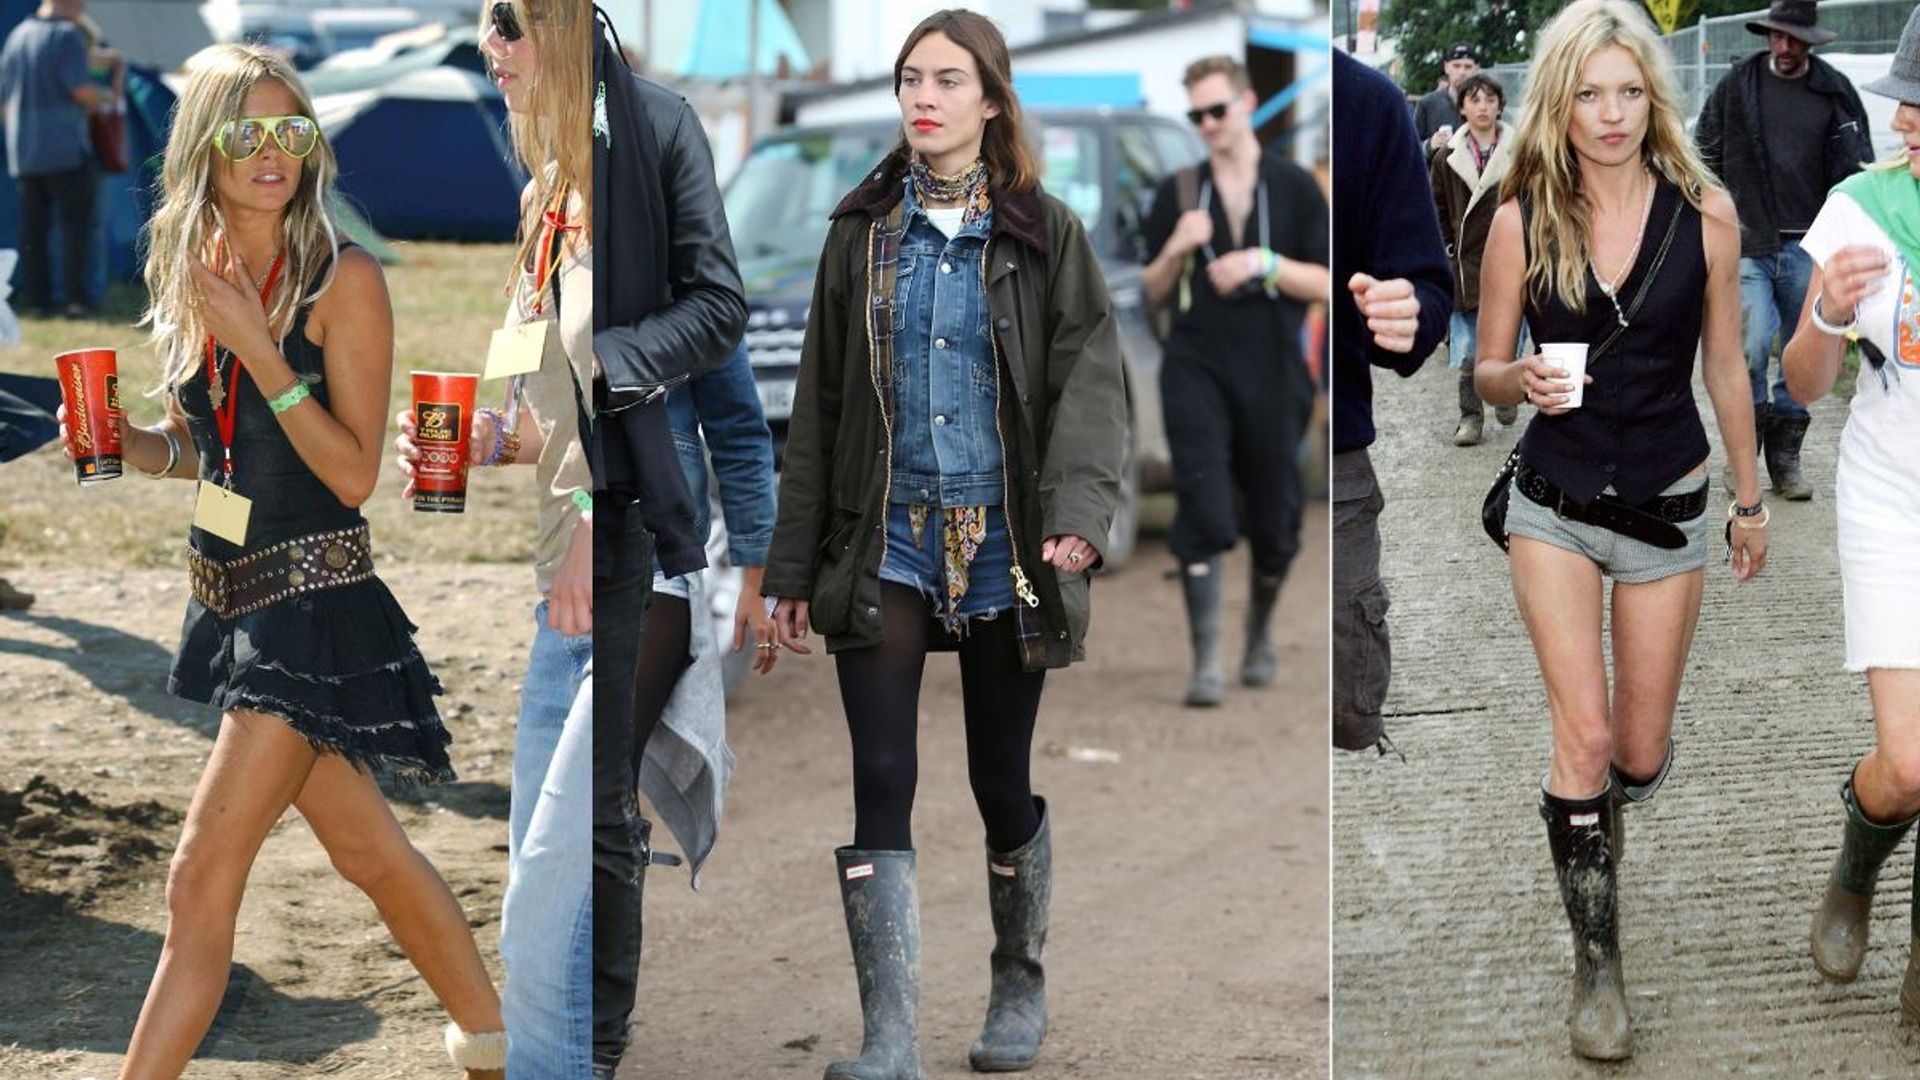 The most iconic Glastonbury looks of all time